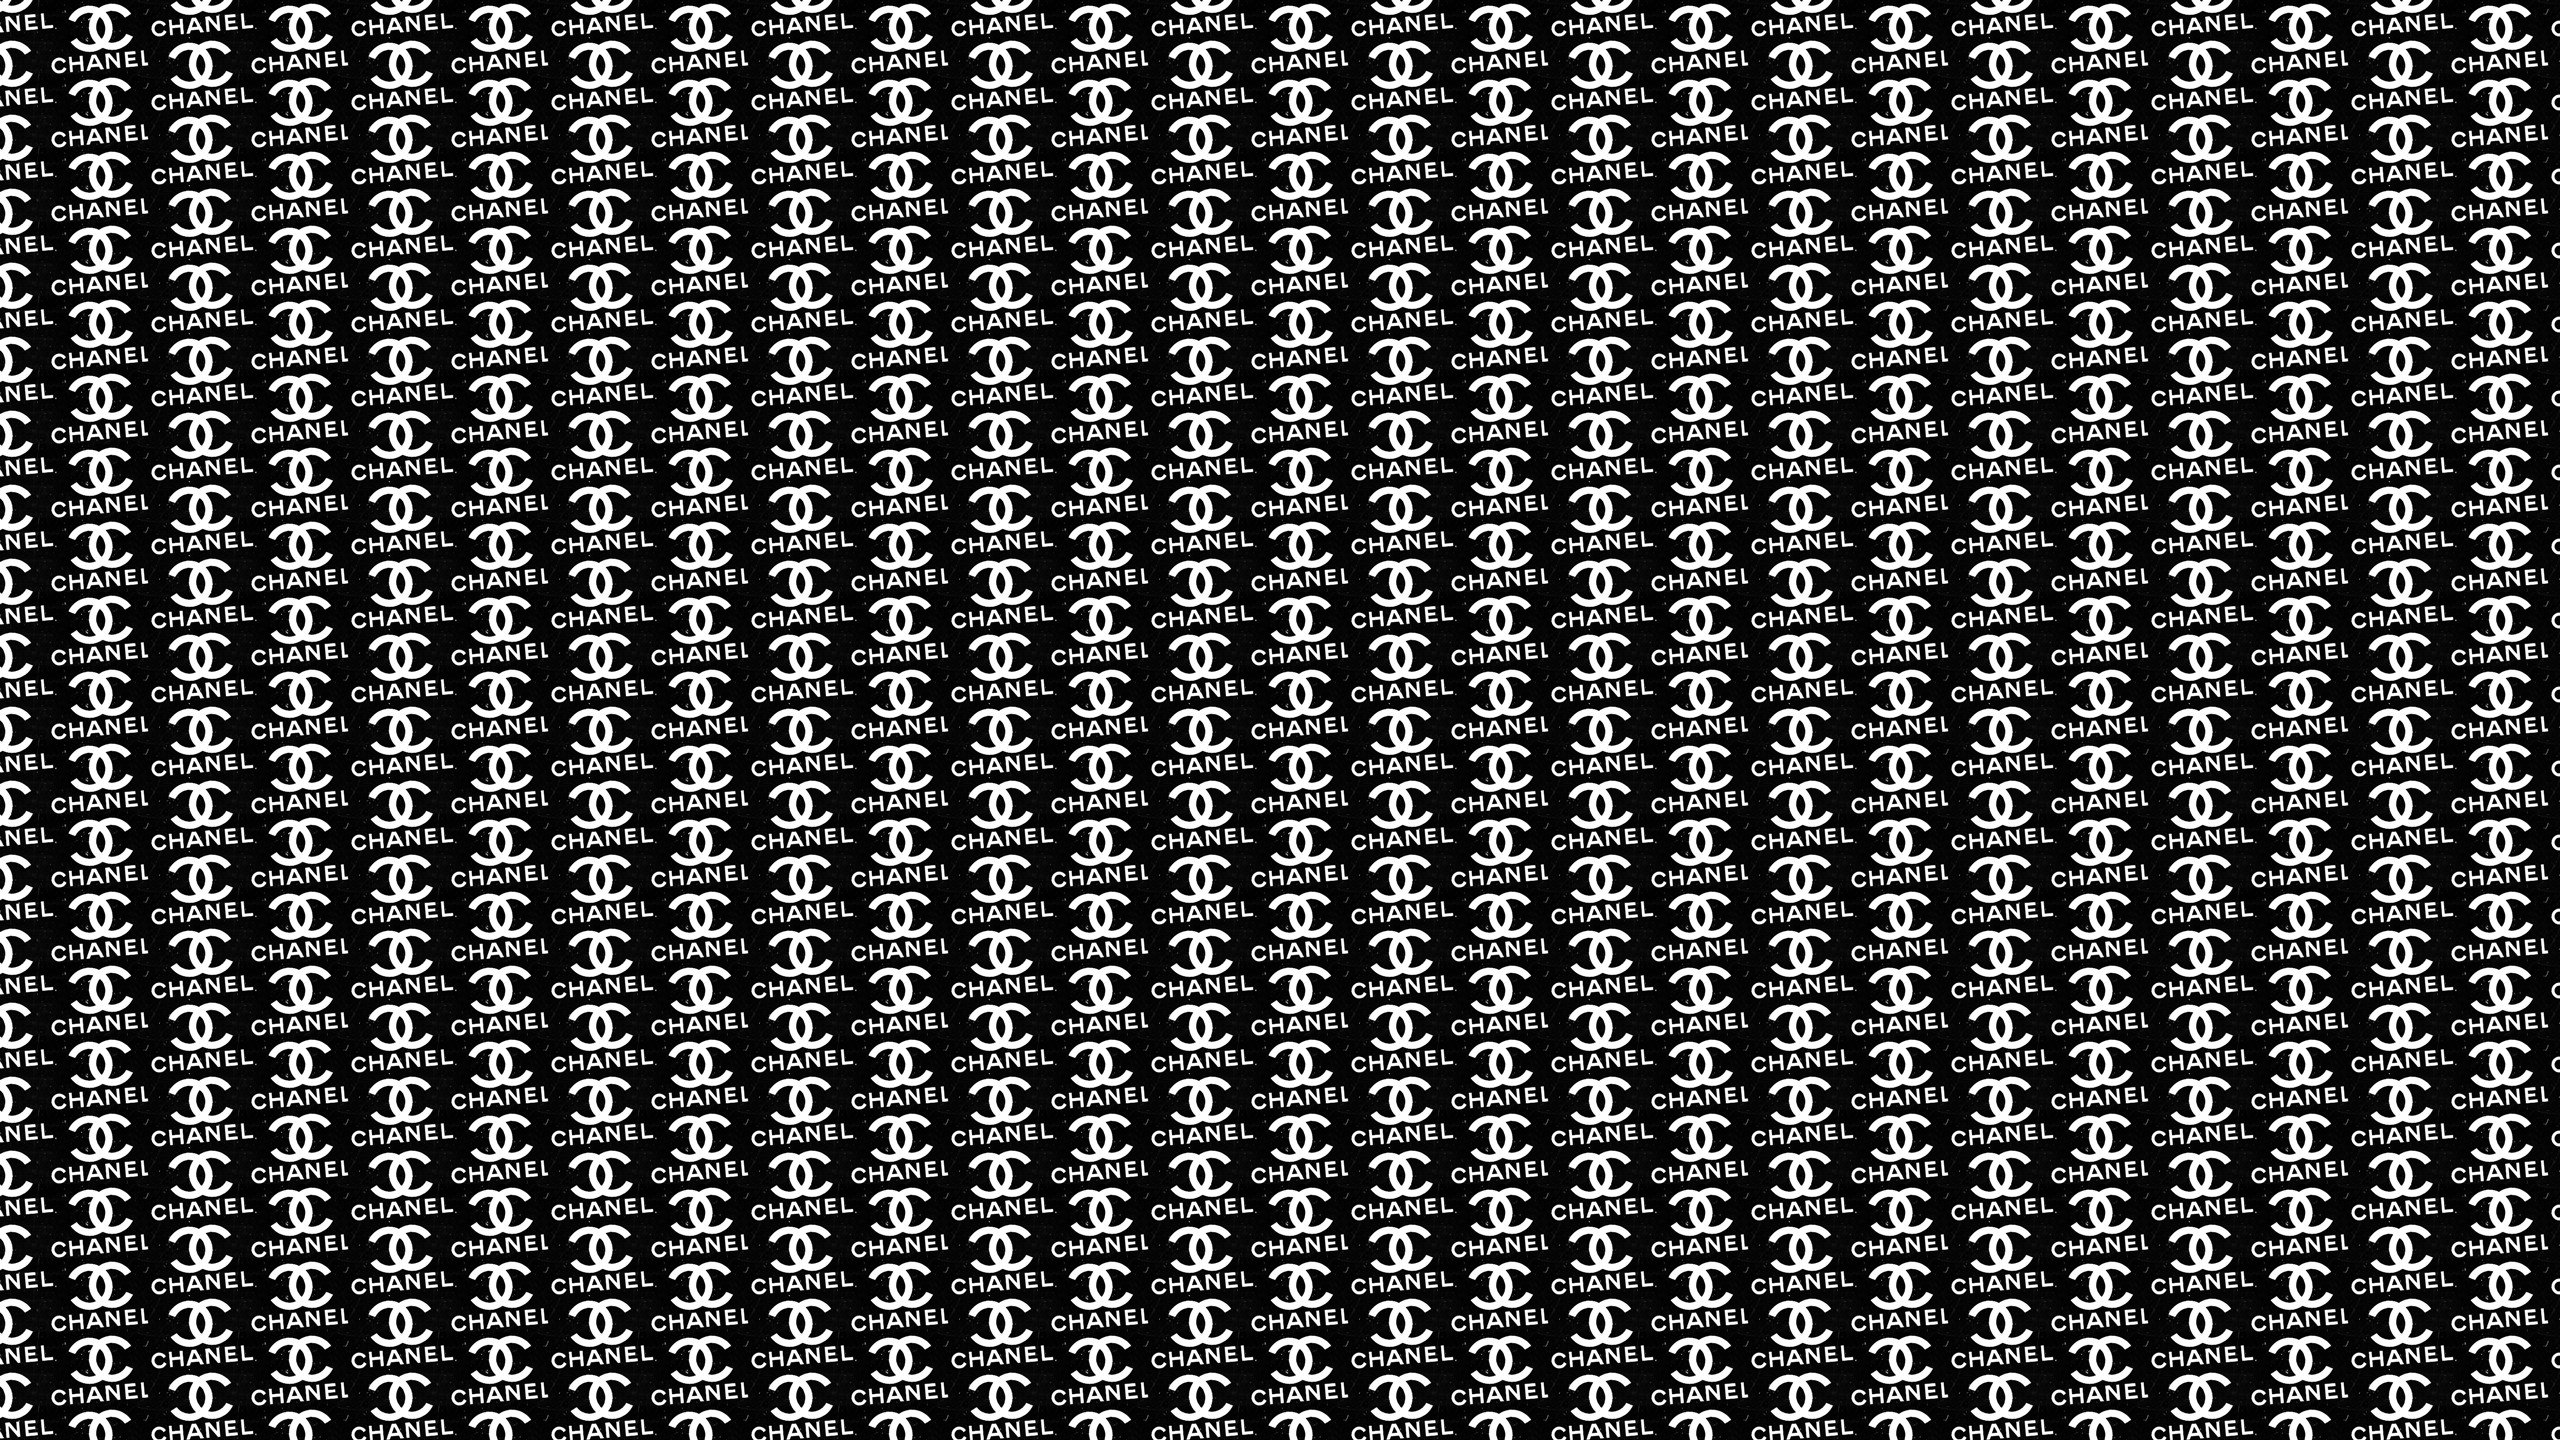 this Chanel Logos Desktop Wallpaper is easy Just save the wallpaper 2560x1440